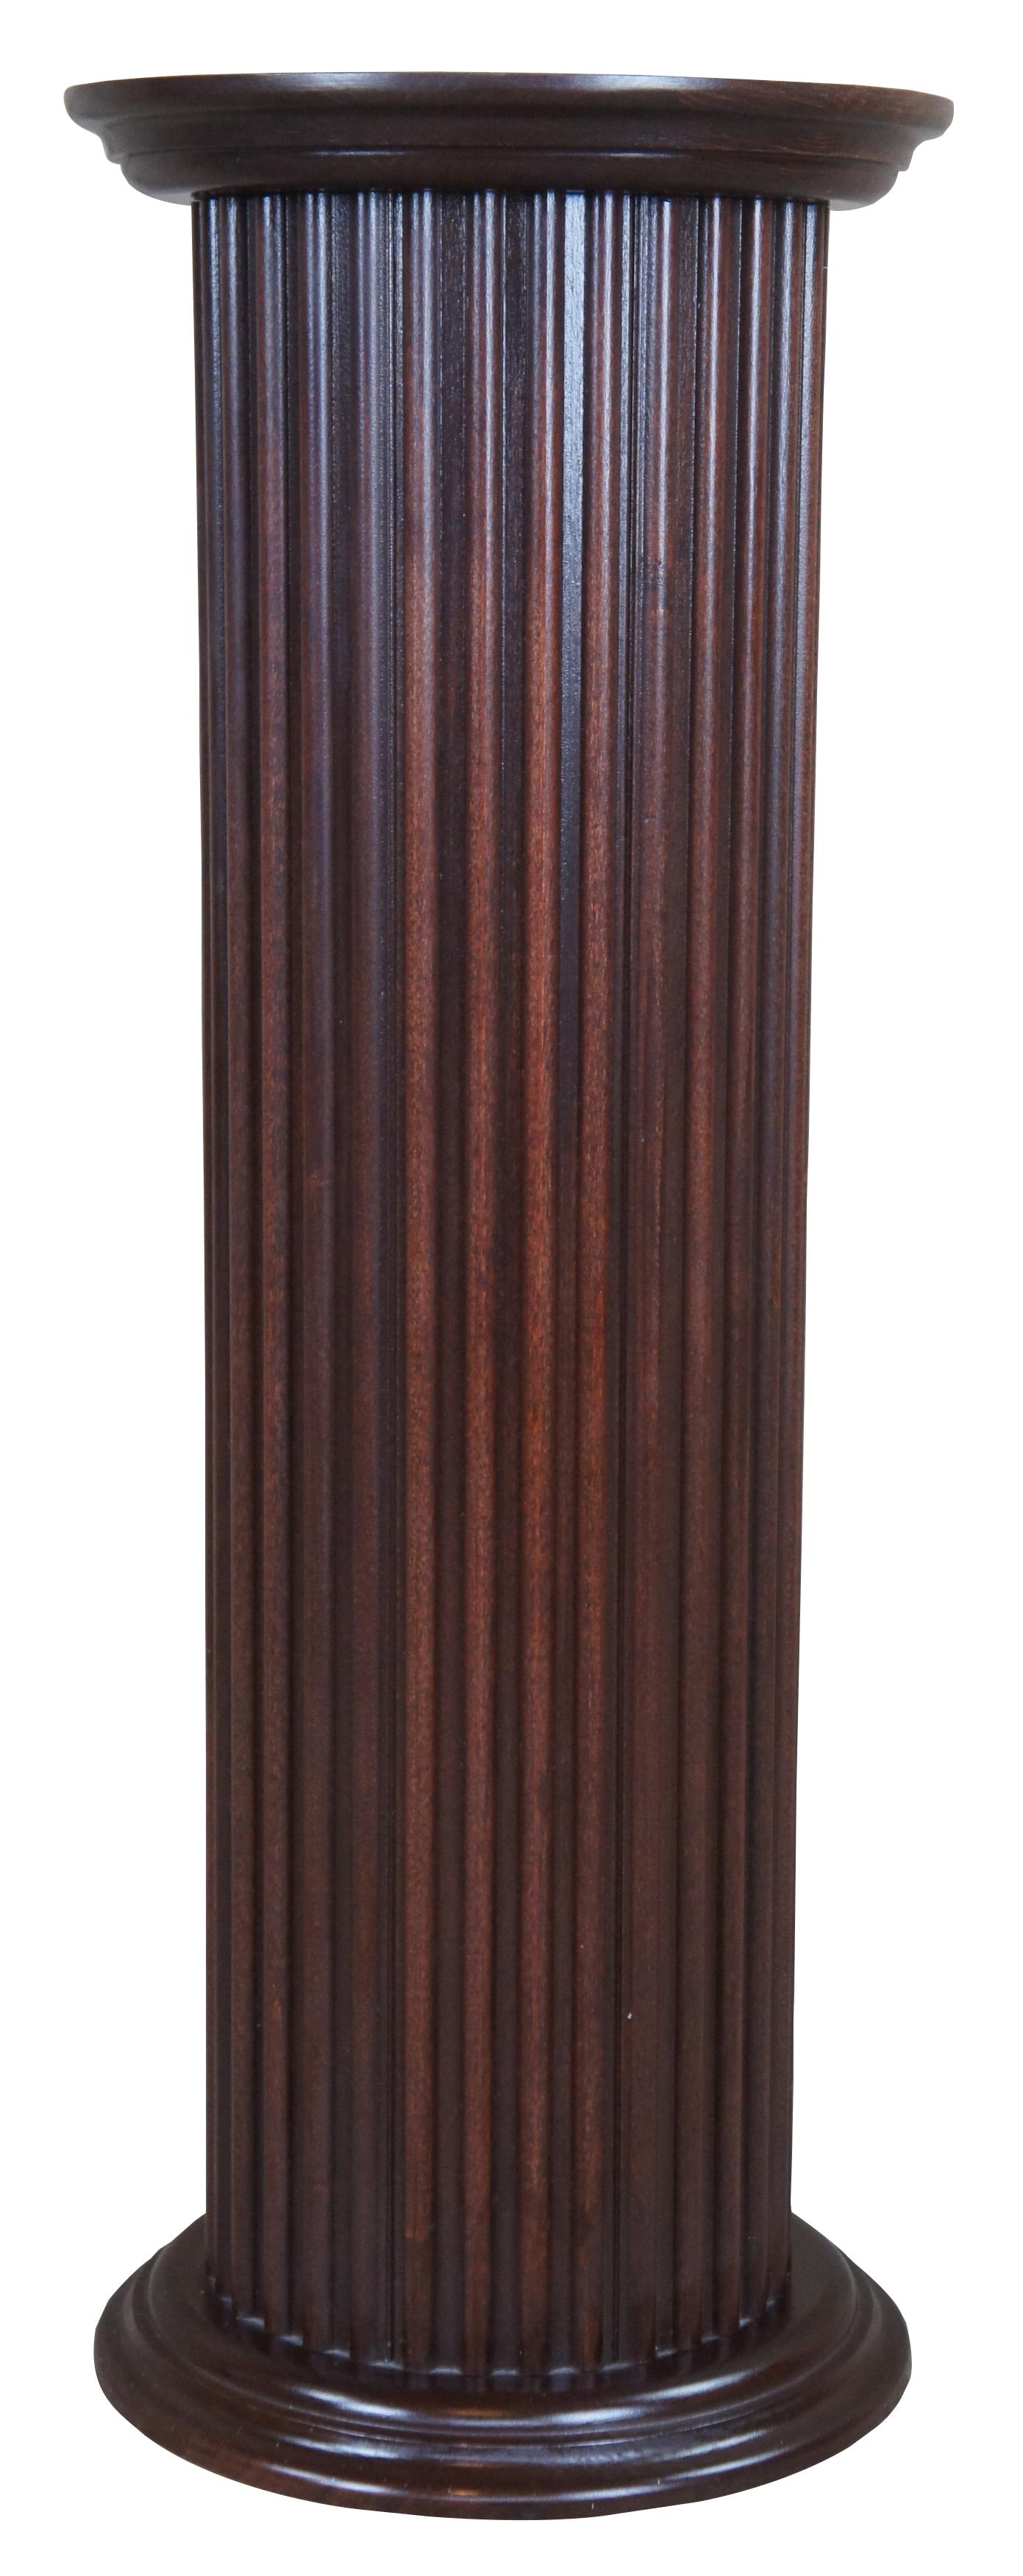 Vintage round pedestal or stand. Made of pine with a mahogany finish and reeded columns. Measures: 30”.
  